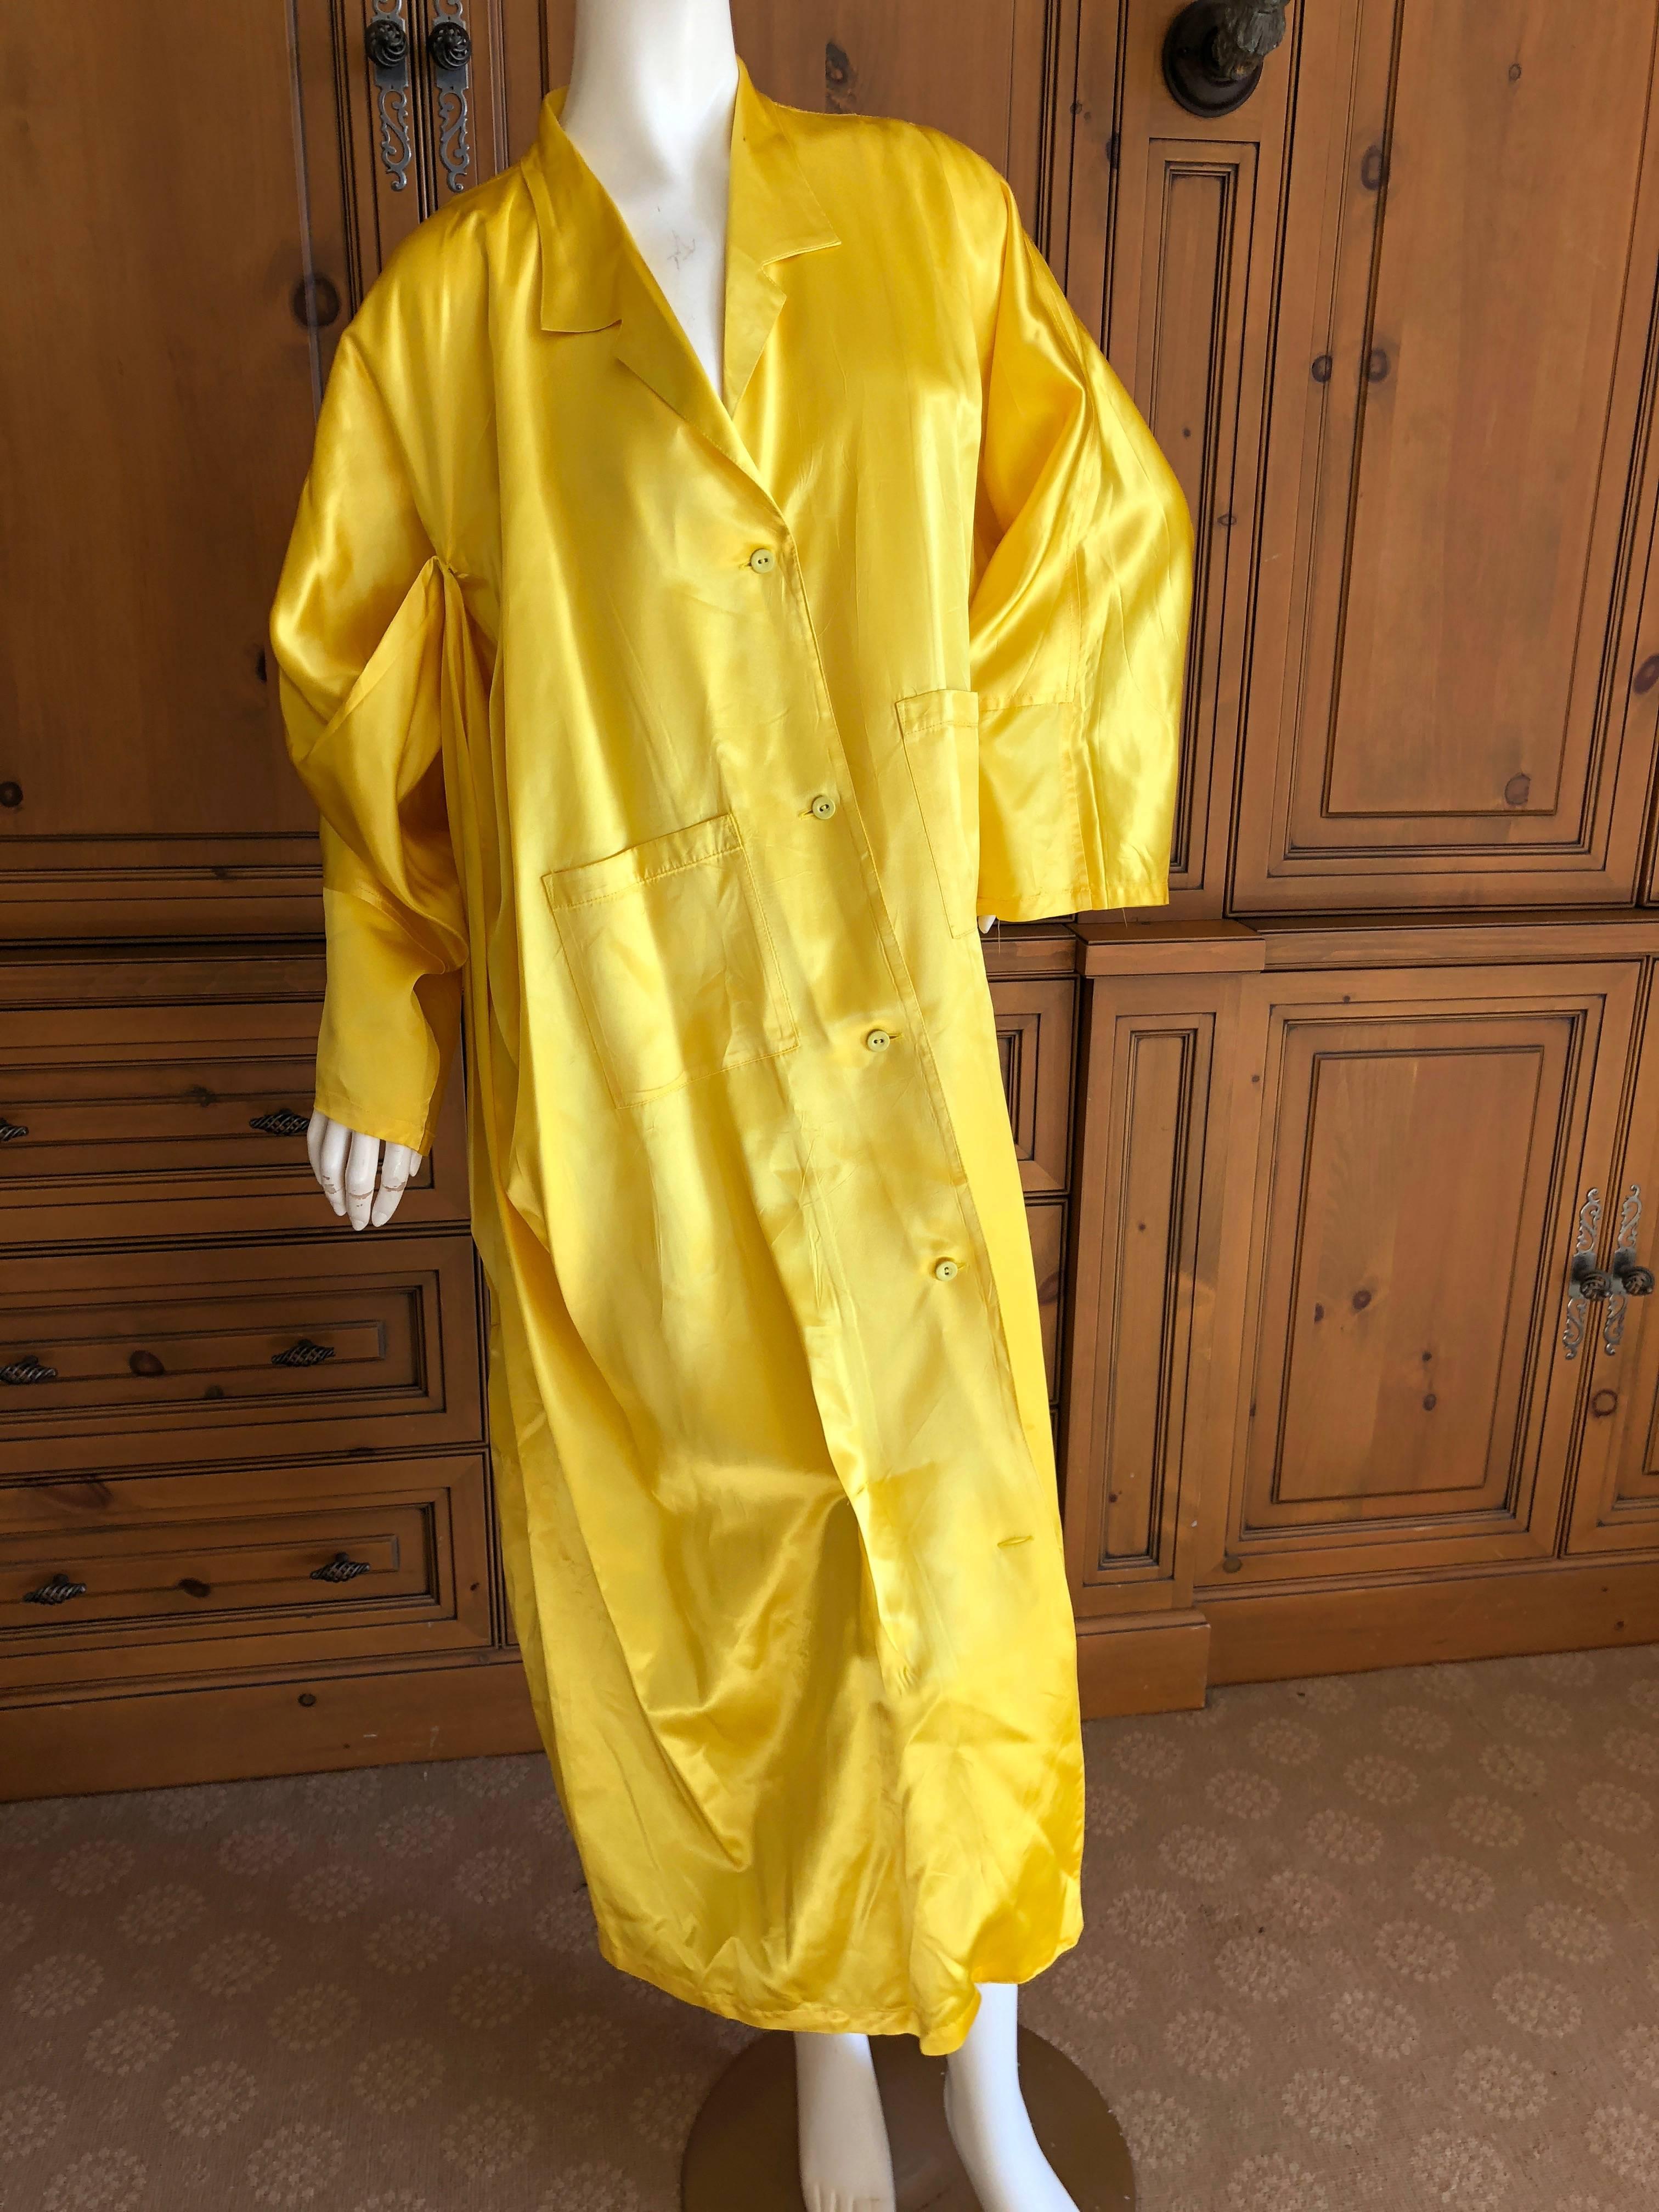 Wonderful oversize coat in an extremely bright neon yellow from Yohji Yamamoto.
Marked size M it is cut very large.
Bust 50